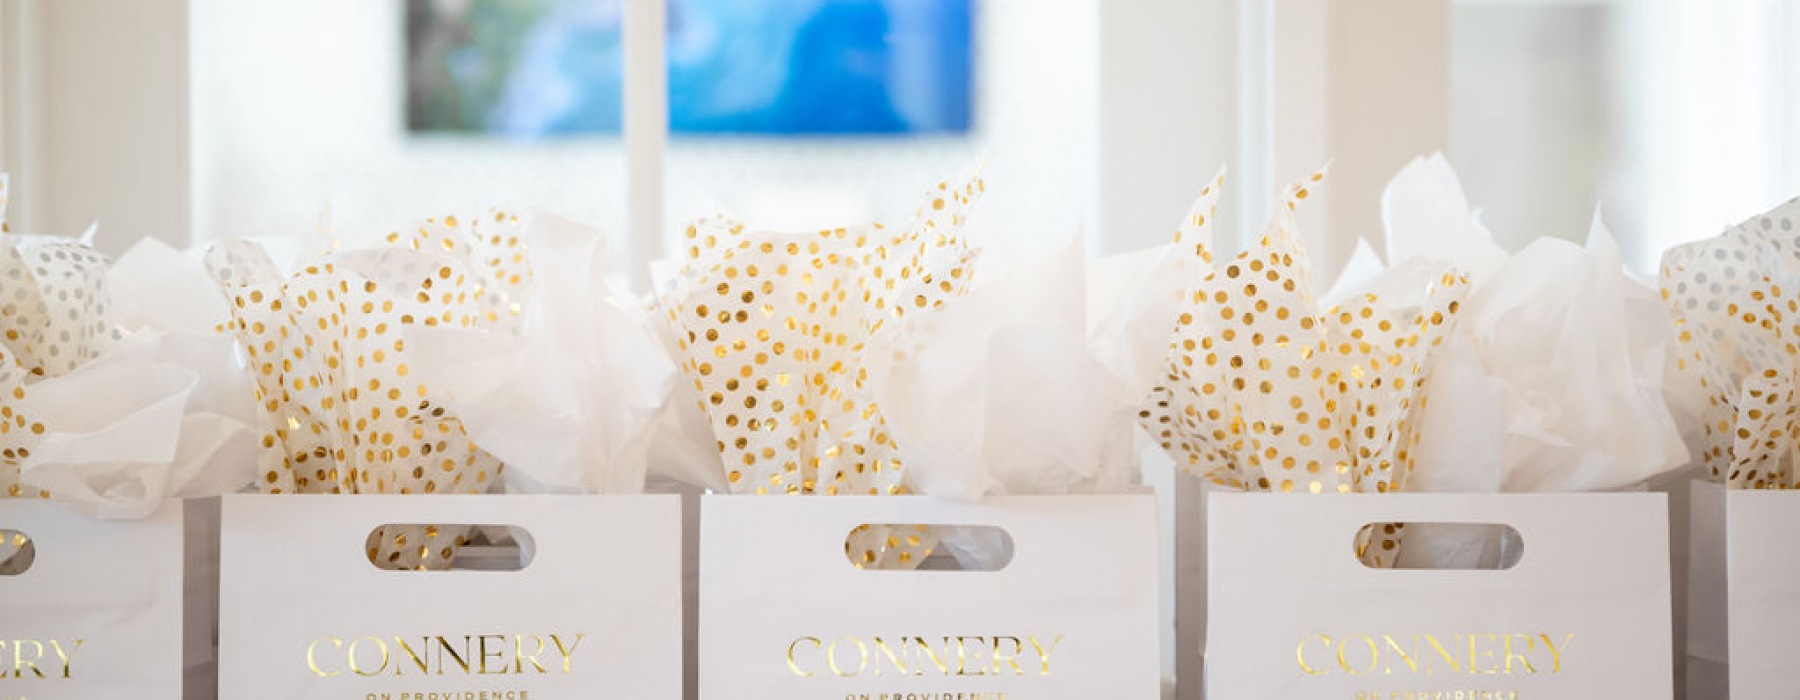 Gift bags